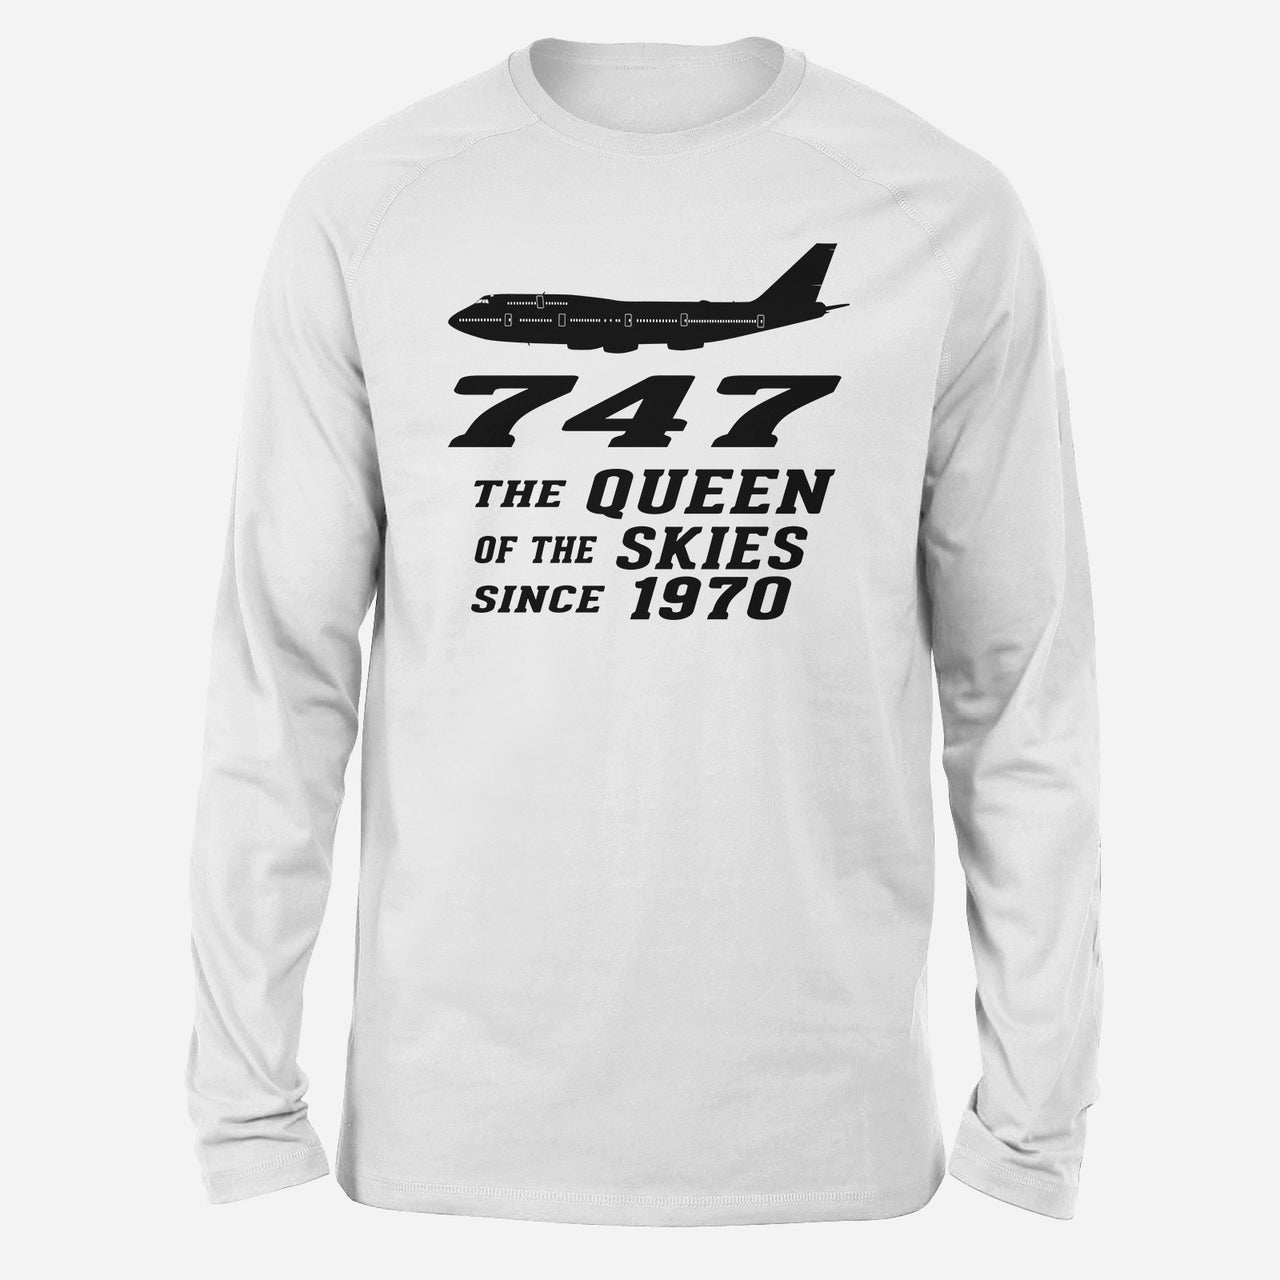 Boeing 747 - Queen of the Skies (2) Designed Designed Long-Sleeve T-Shirts